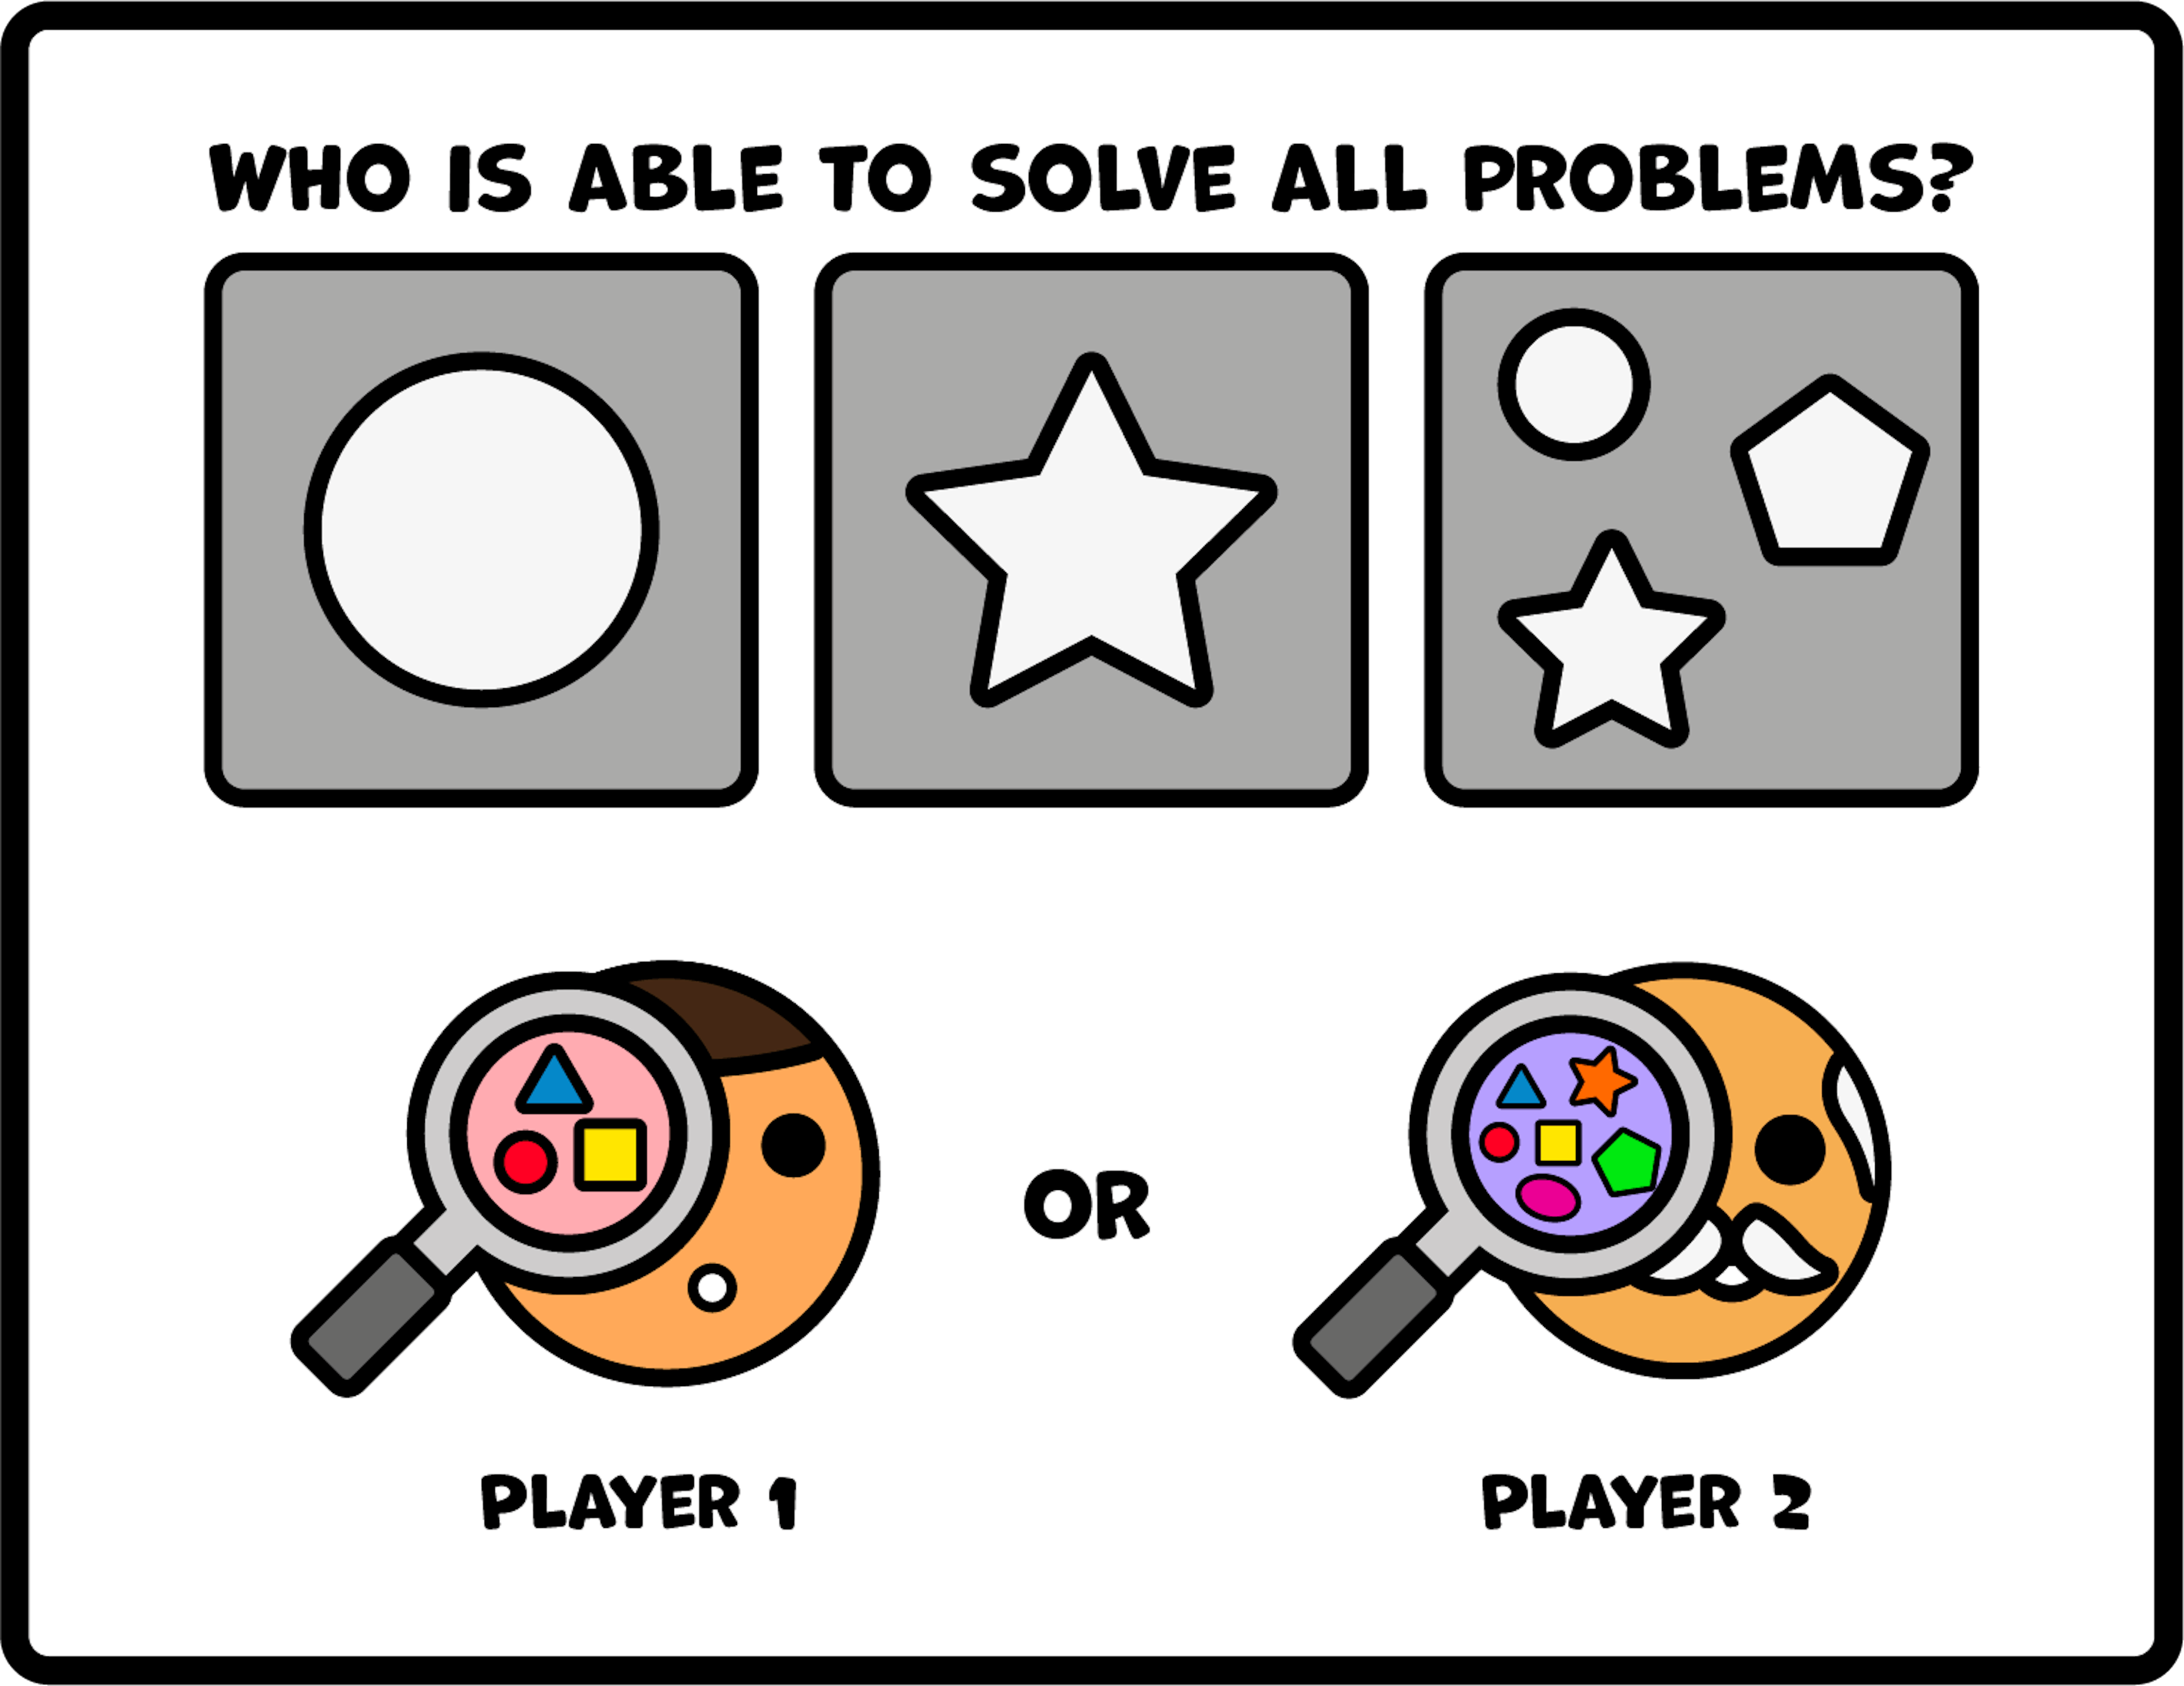 Who is able to solve all the problems? The answer is the one with the right, and most, mental models to solve the problems at hand.